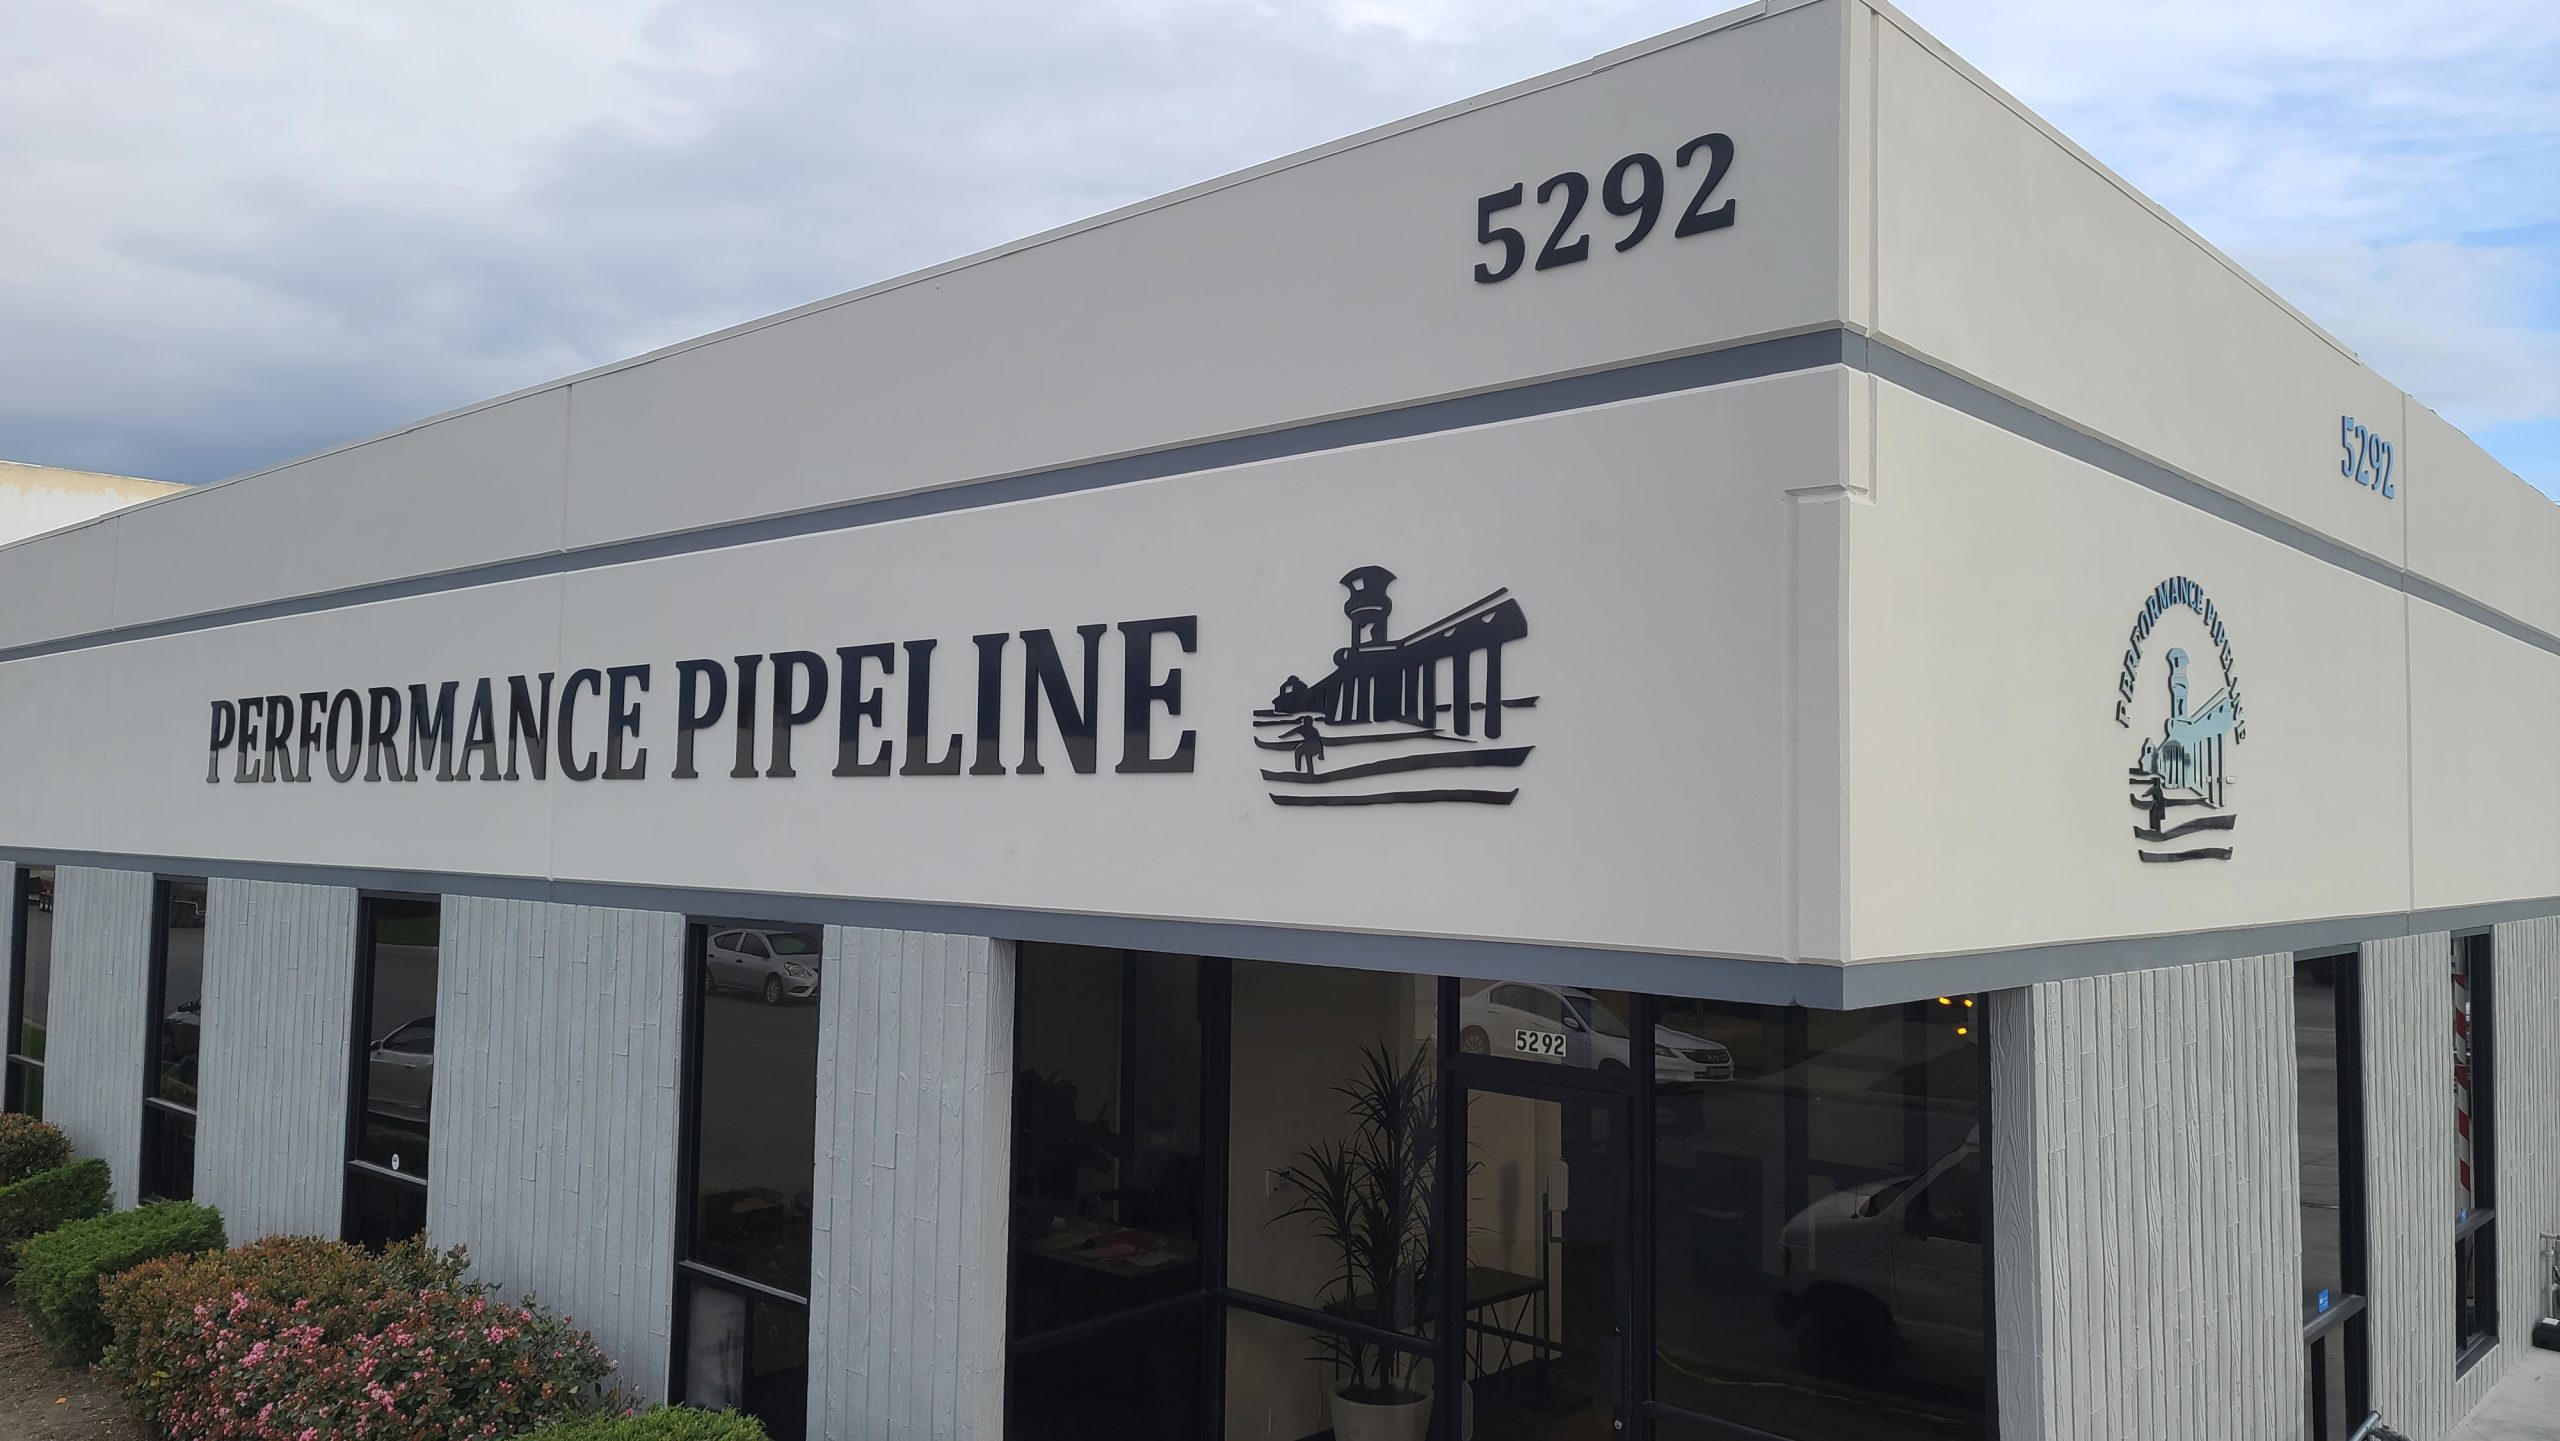 This set of dimensional letters is part of our Business Sign Package for Perfromance Pipeline in Huntington Beach.